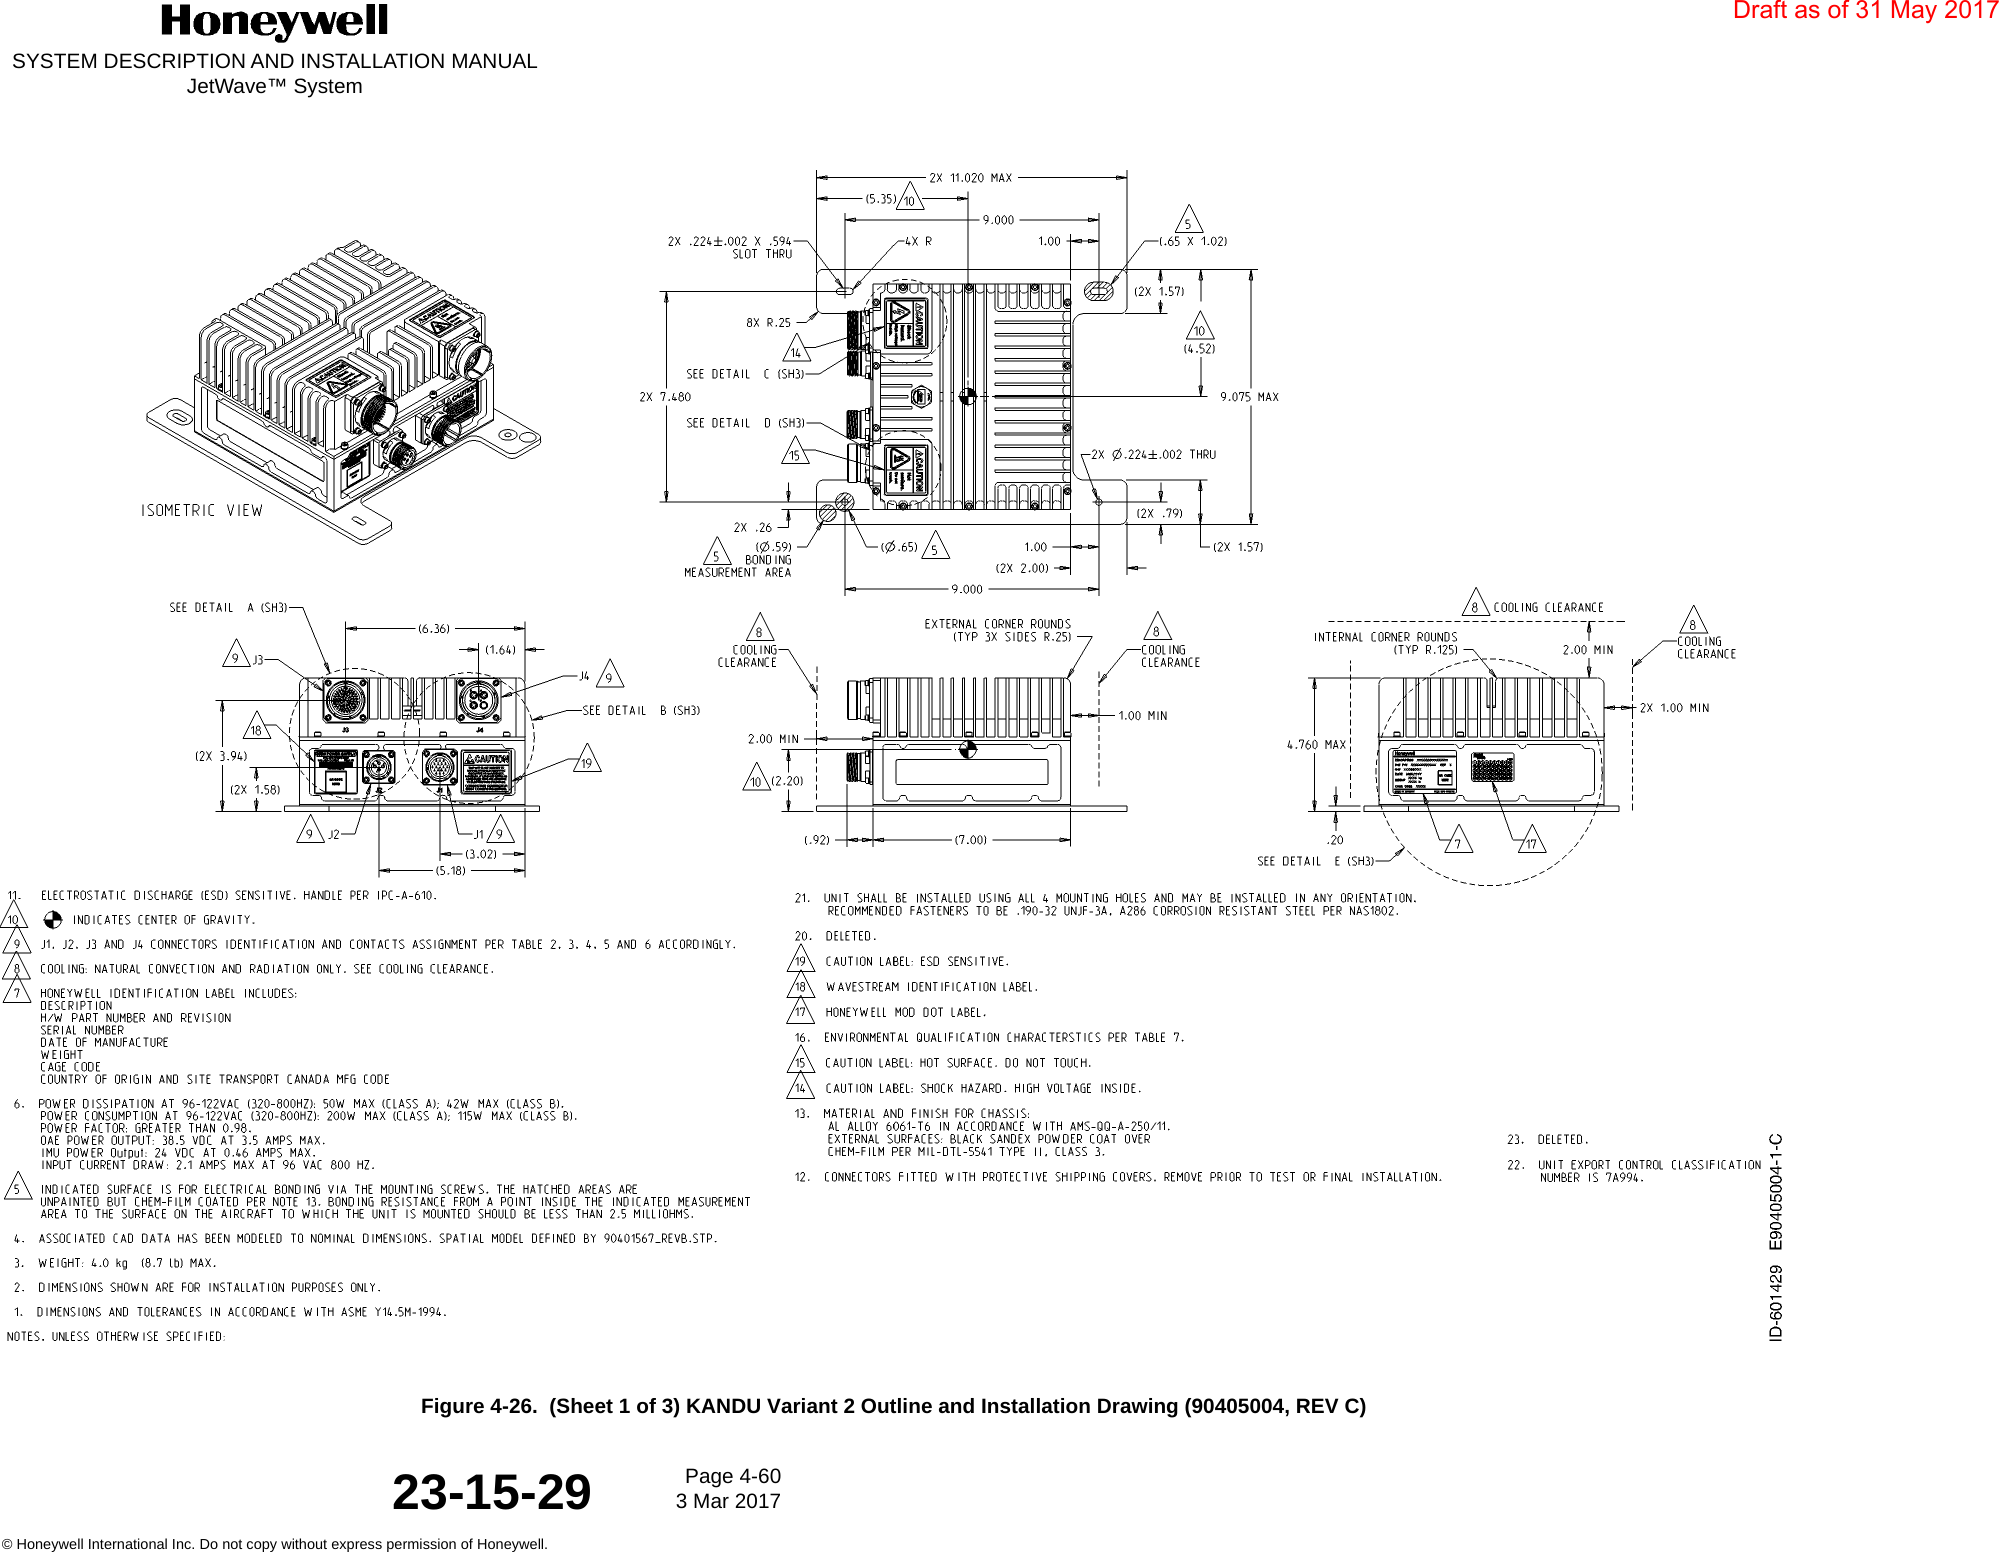 SYSTEM DESCRIPTION AND INSTALLATION MANUALJetWave™ SystemPage 4-60 3 Mar 2017© Honeywell International Inc. Do not copy without express permission of Honeywell.23-15-29Figure 4-26.  (Sheet 1 of 3) KANDU Variant 2 Outline and Installation Drawing (90405004, REV C)Draft as of 31 May 2017